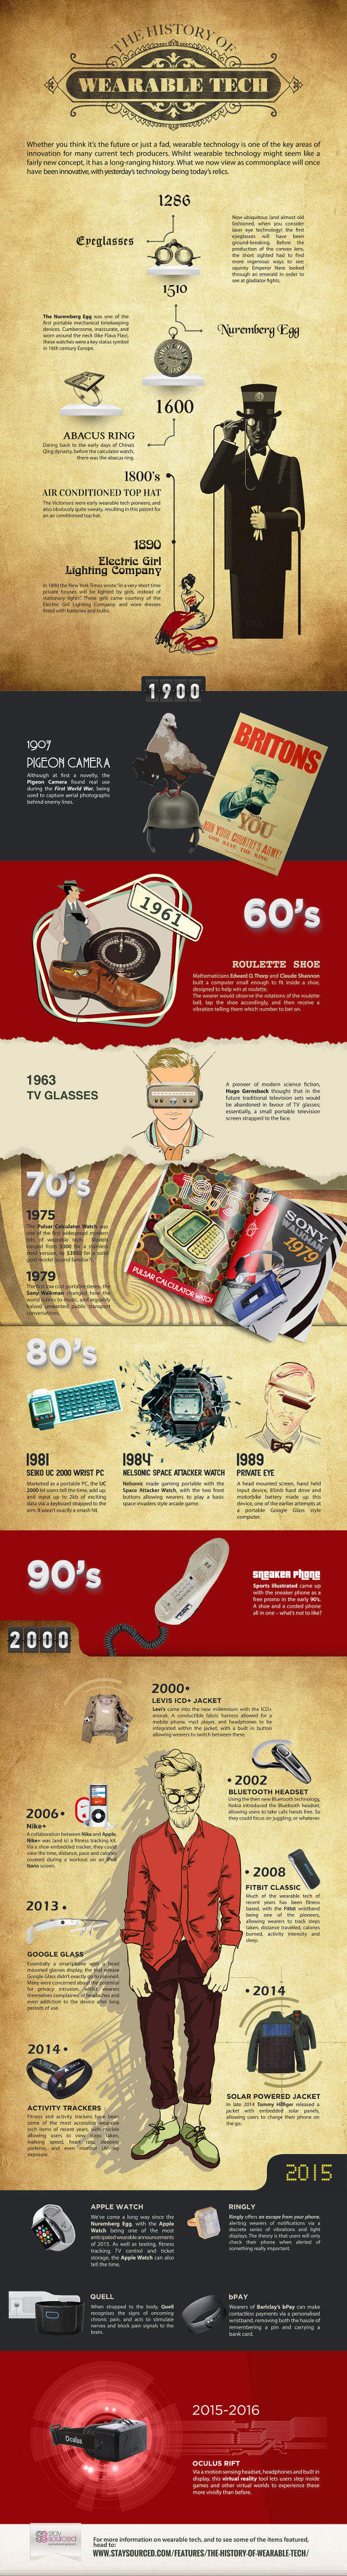 Wearable Tech Infographic2